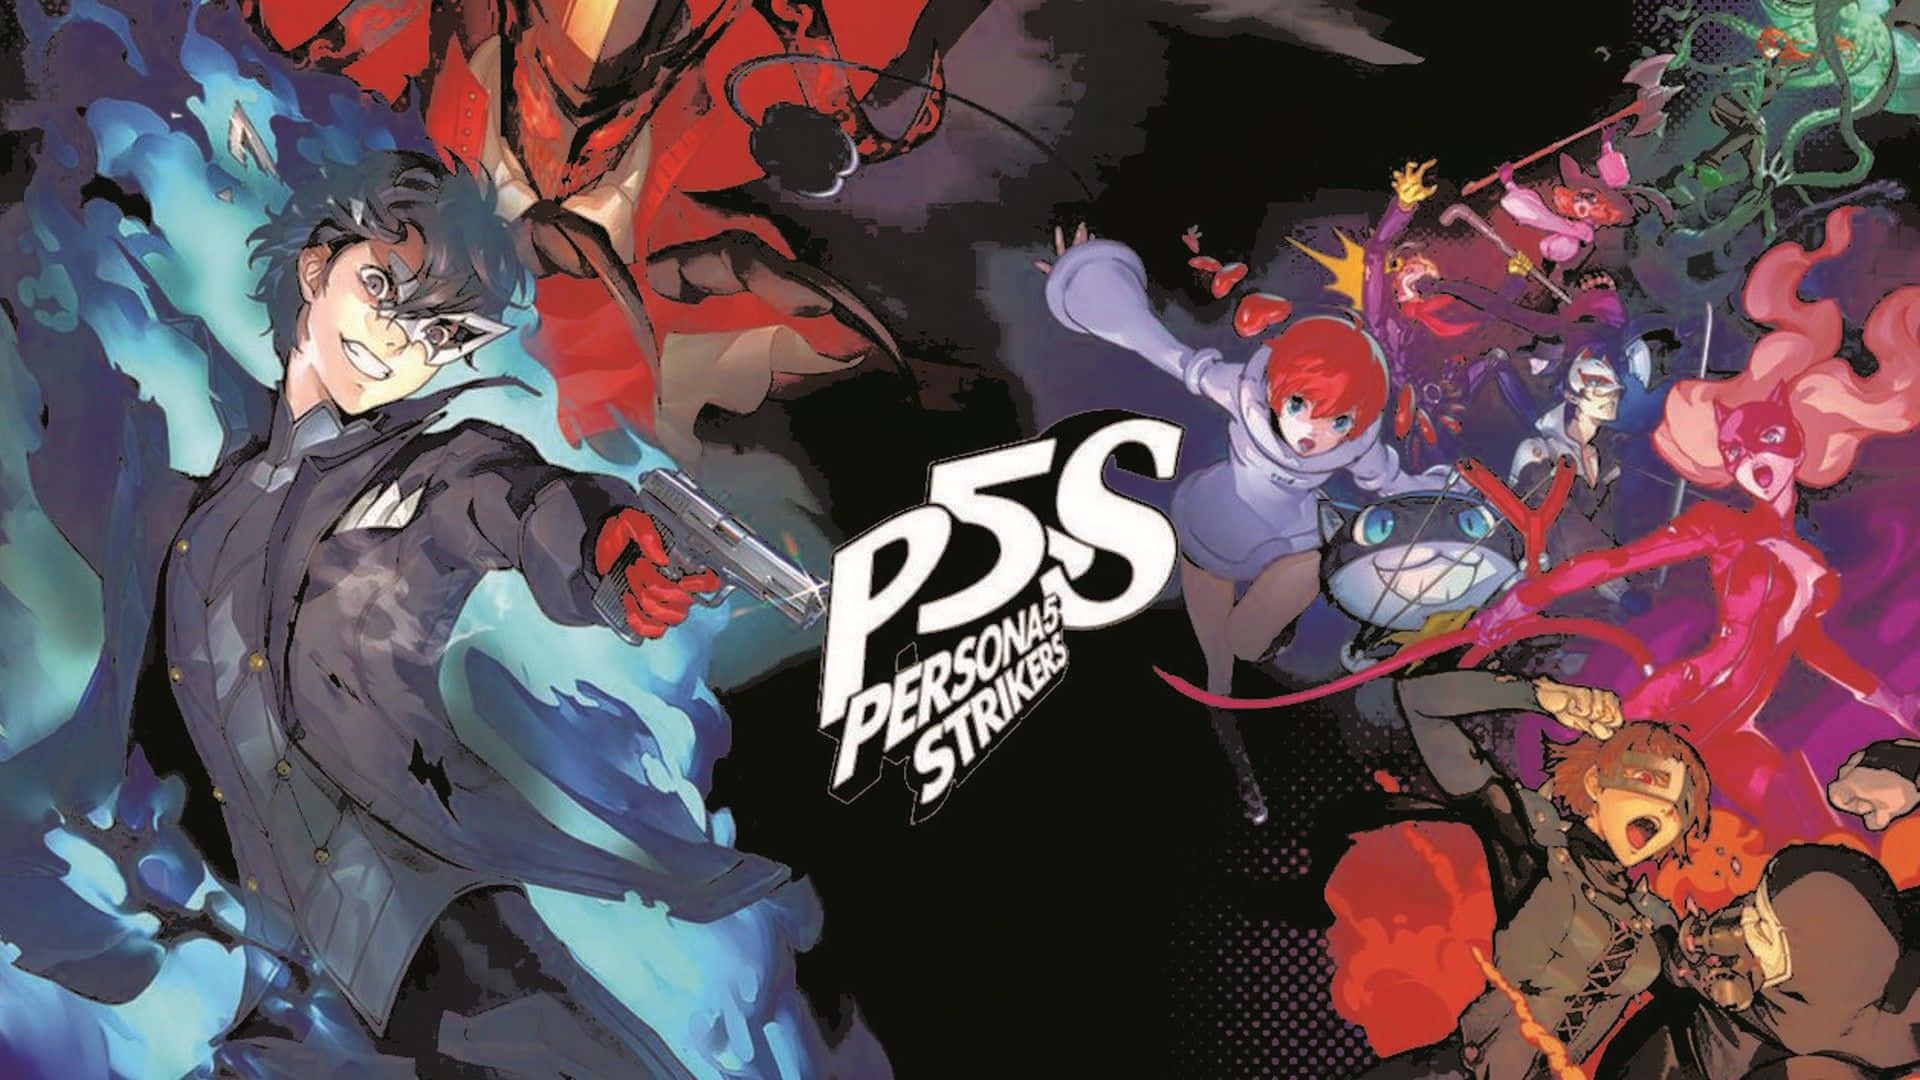 Persona 5 Strikers - Action-packed Adventure Wallpaper